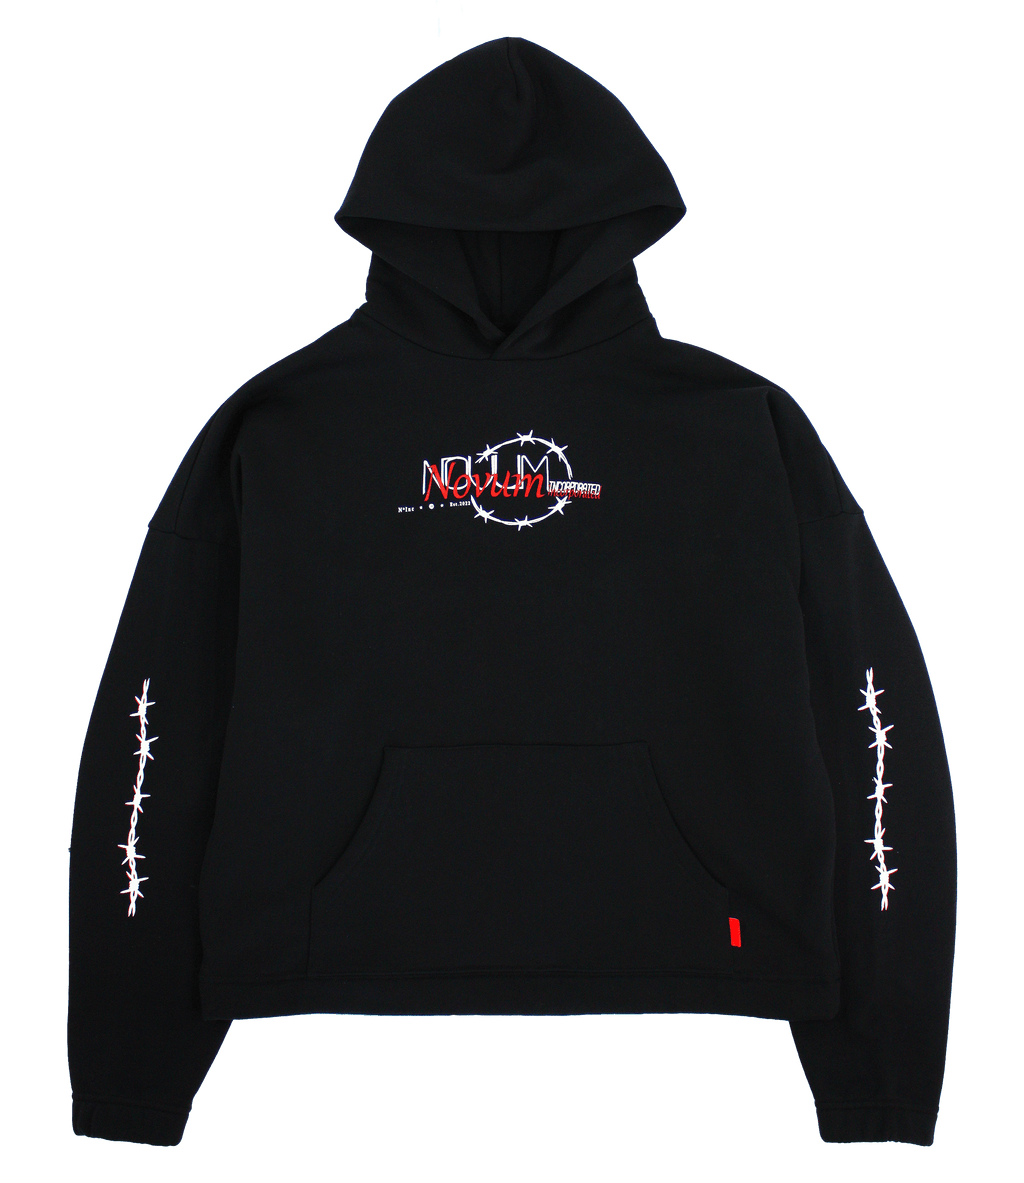 The Wired Hoodie